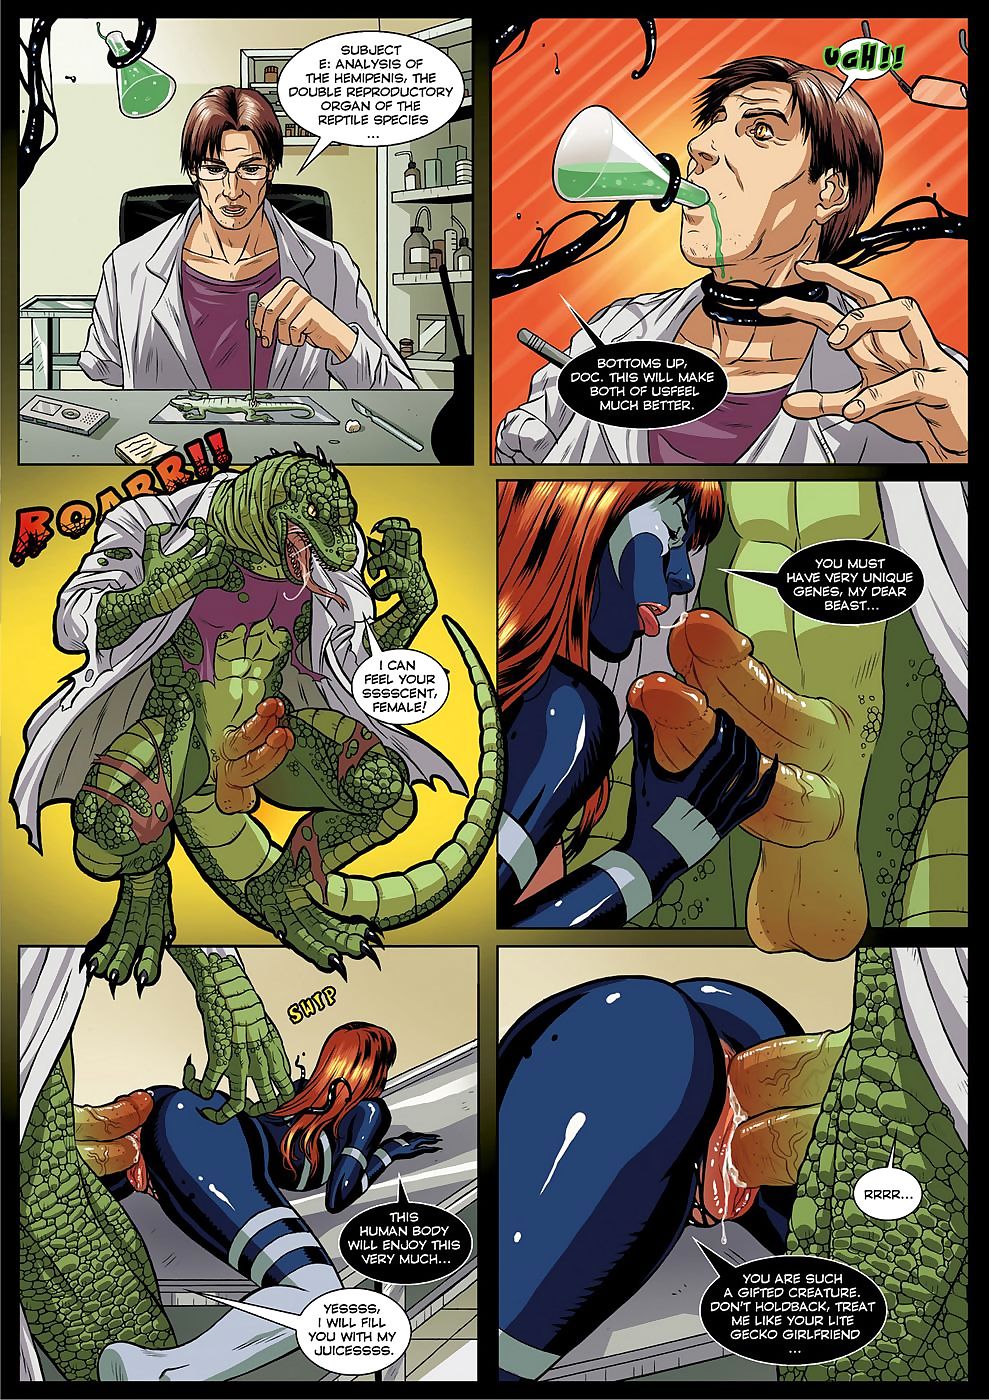 Spider-Man Sexual Symbiosis 1 page 1